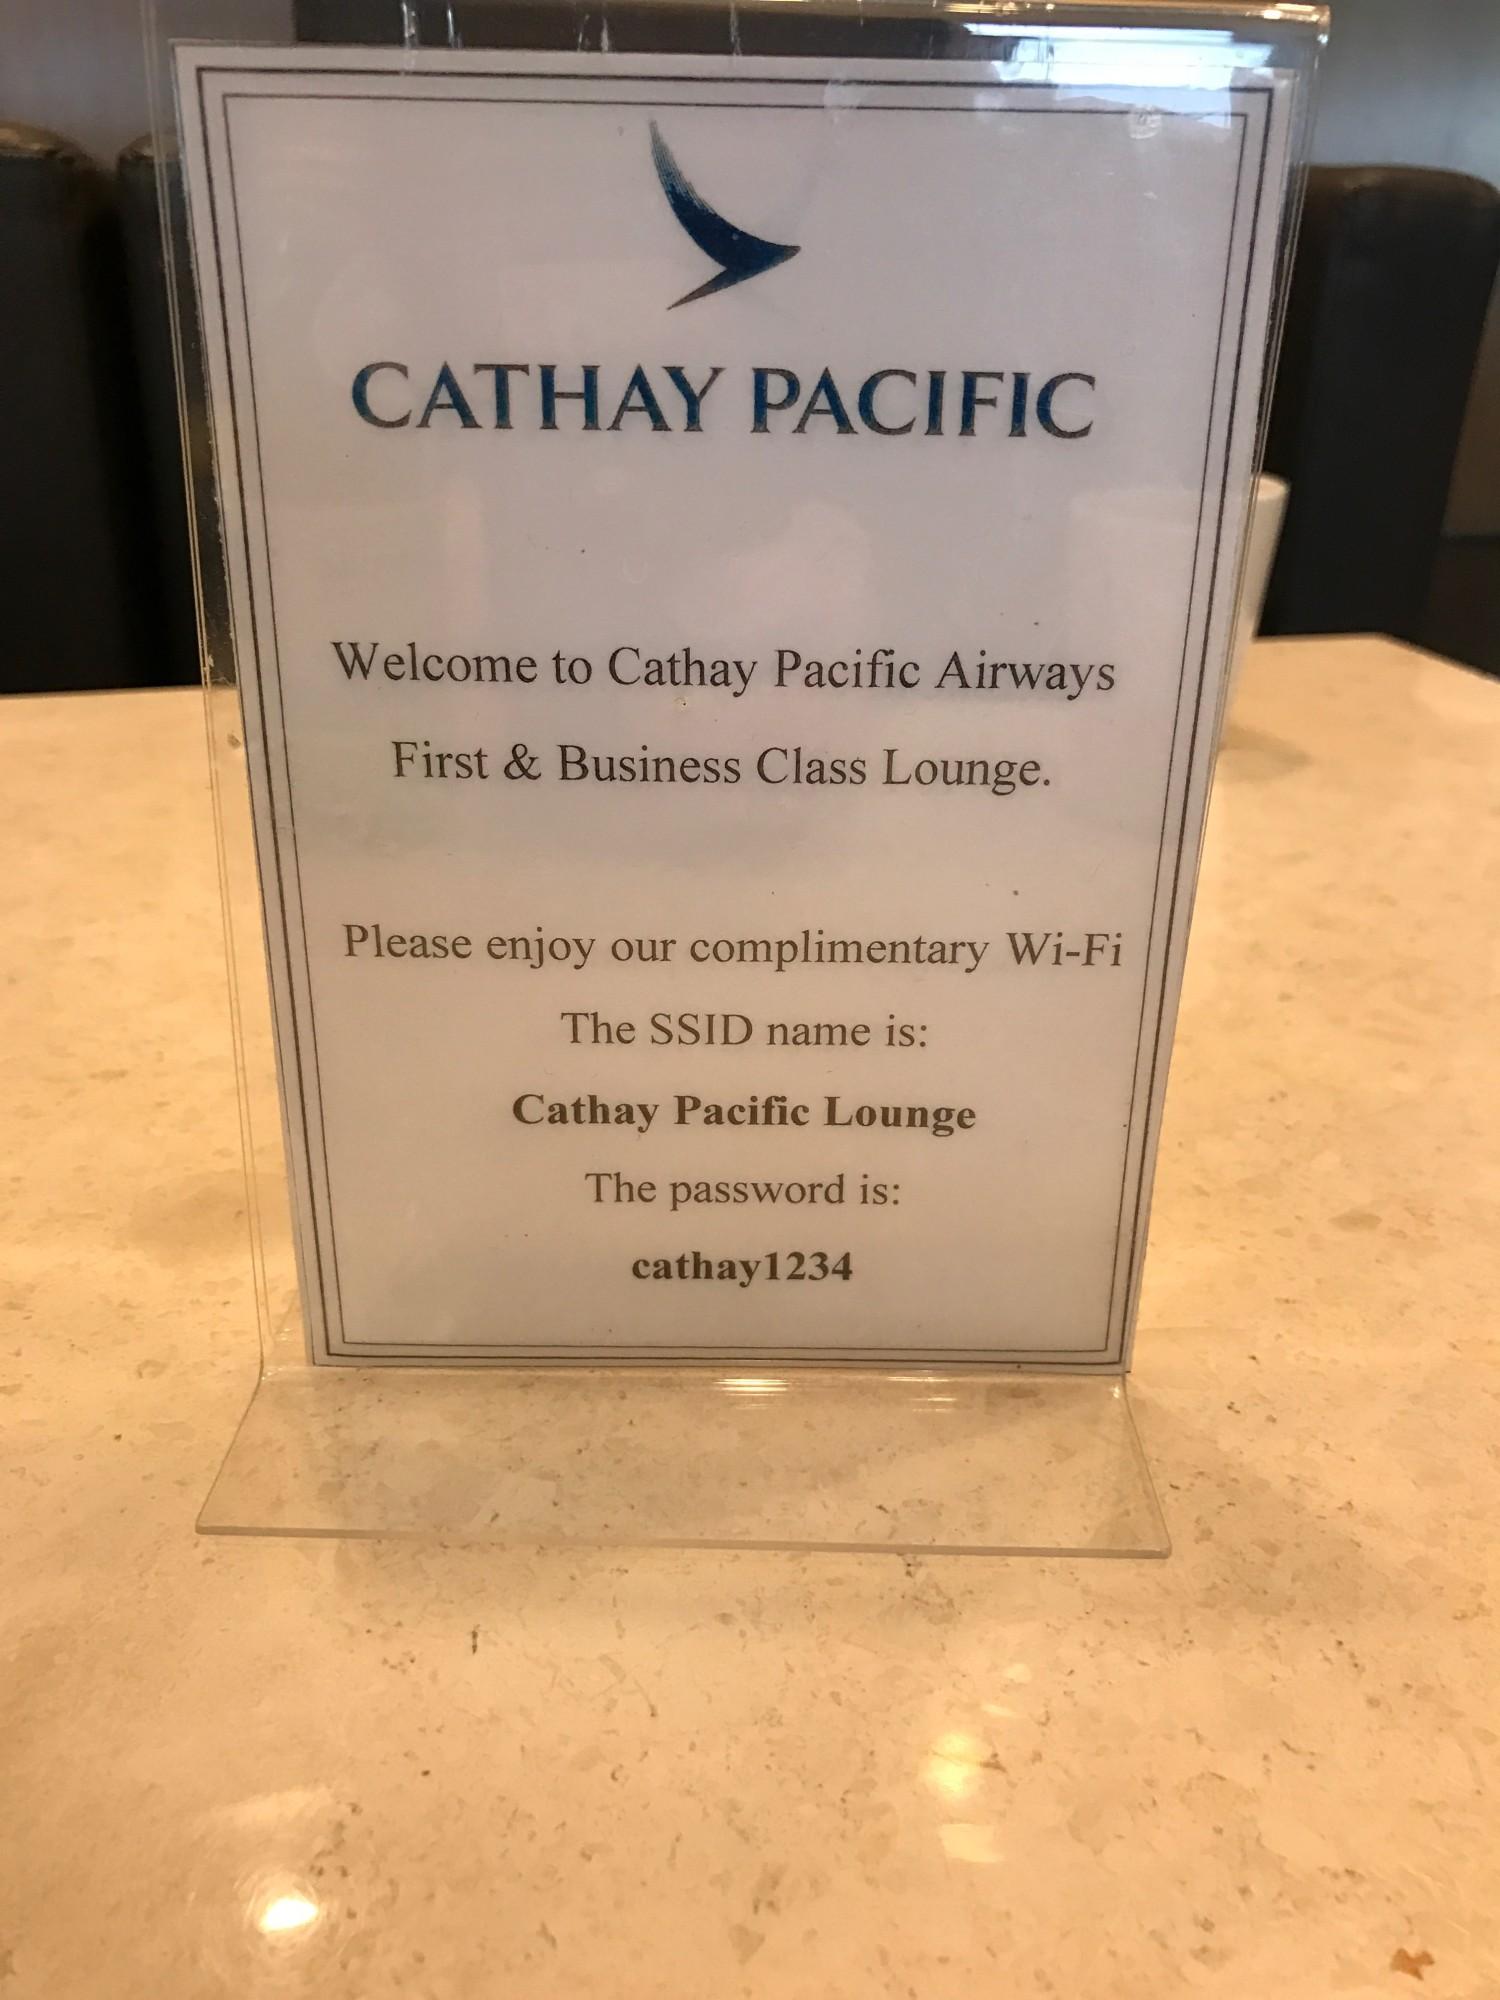 Cathay Pacific First and Business Class Lounge image 70 of 74